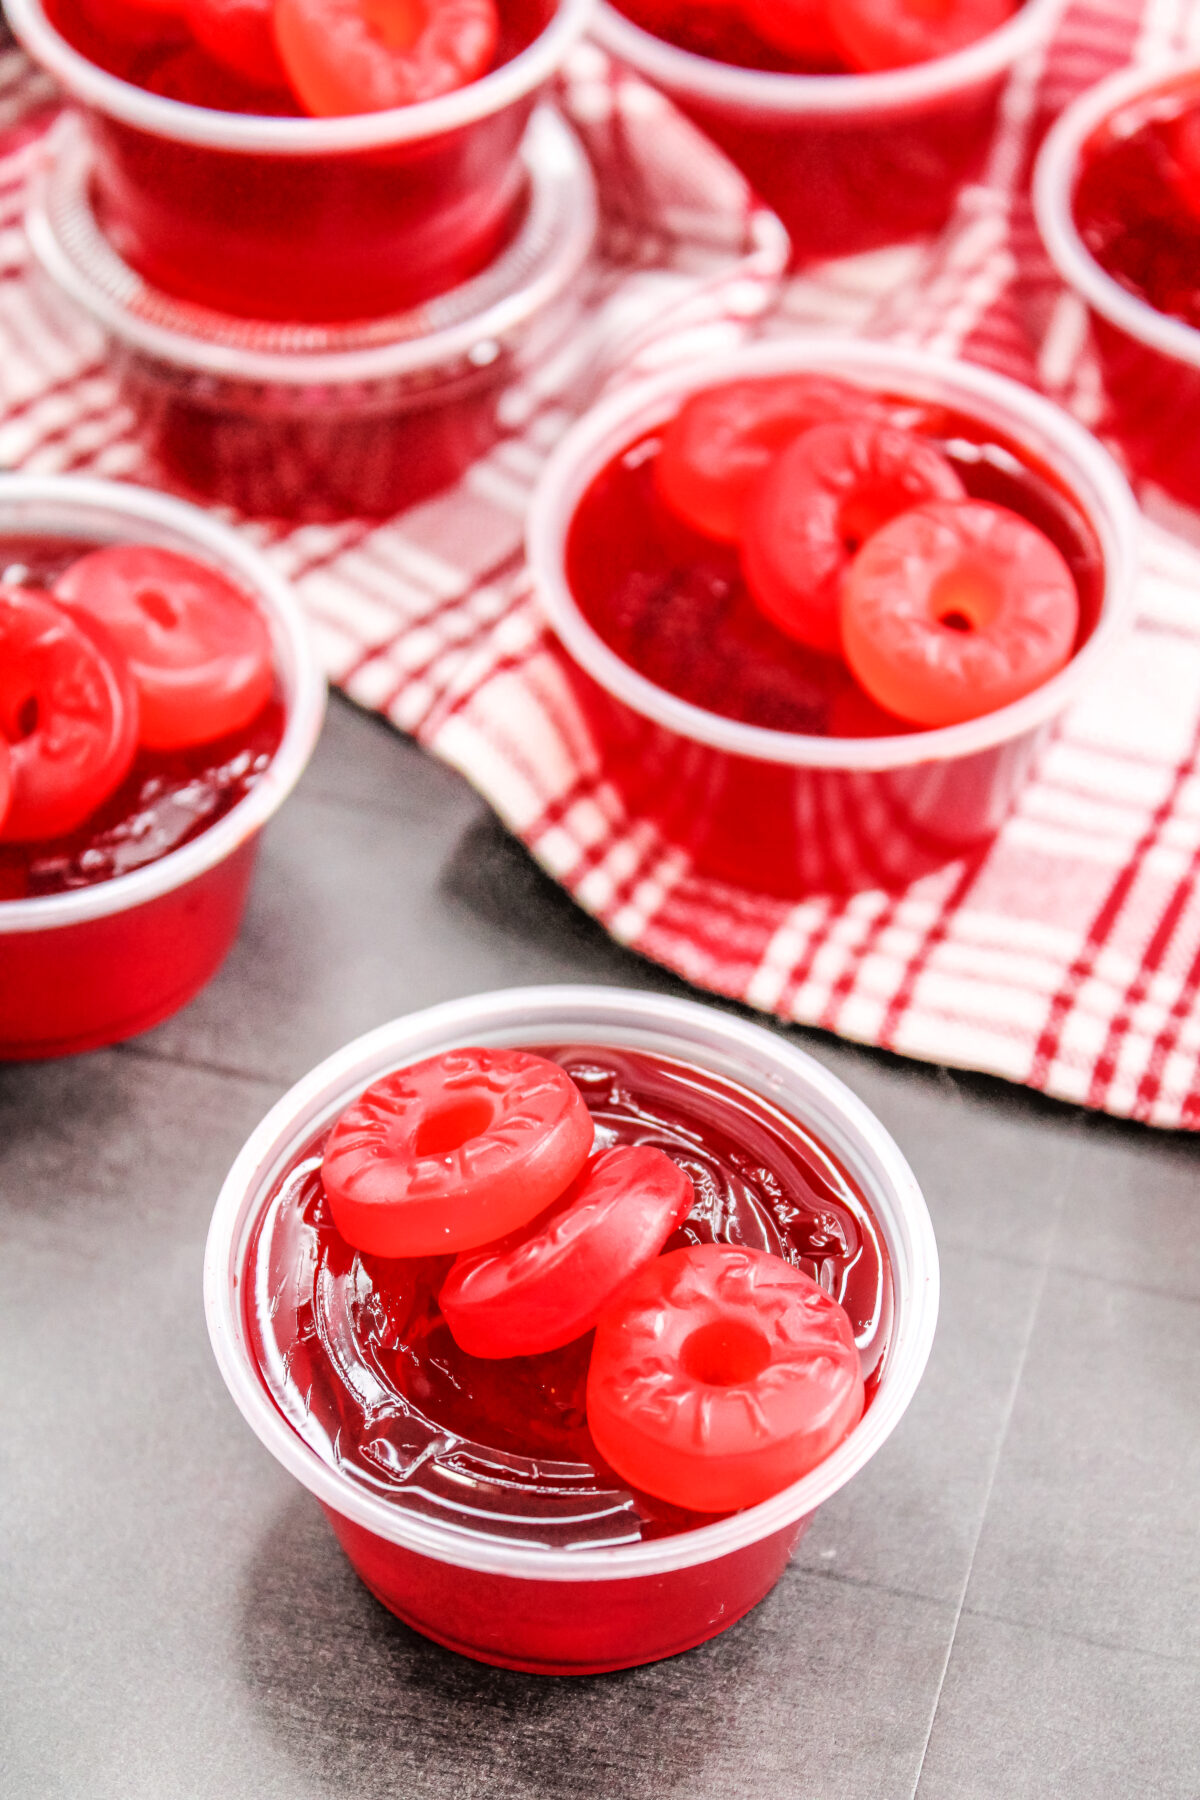 Love cherry lifesavers? Then you'll love this delicious cherry lifesaver jello shots recipe! Perfect for parties, they are sure to be a hit!